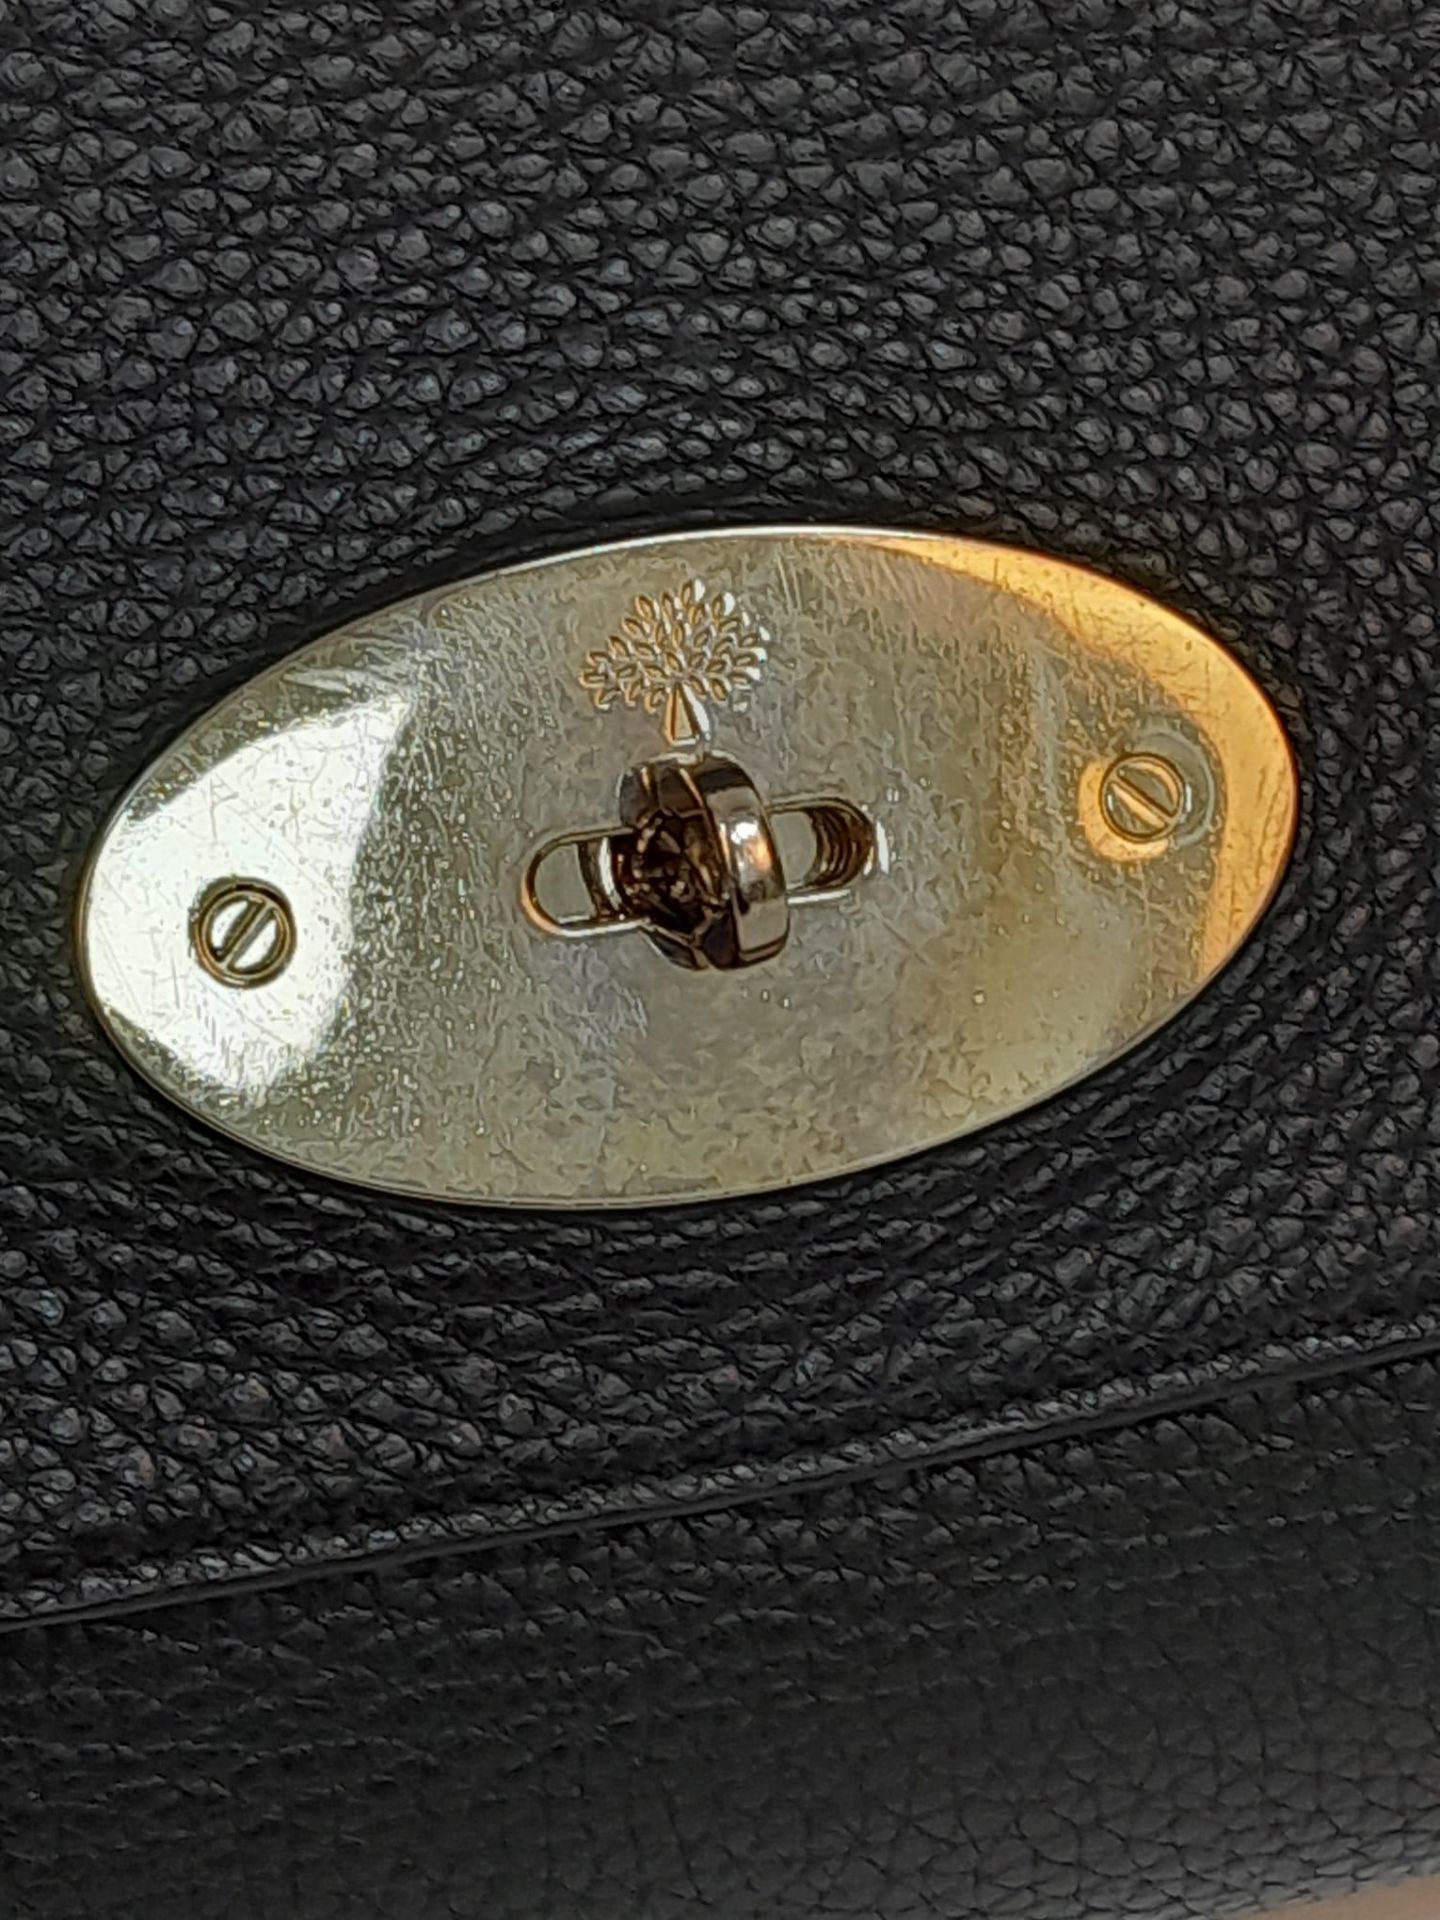 A Mulberry Black 'Lily' Bag. Leather exterior with gold-toned hardware, chain and leather strap, - Image 7 of 12